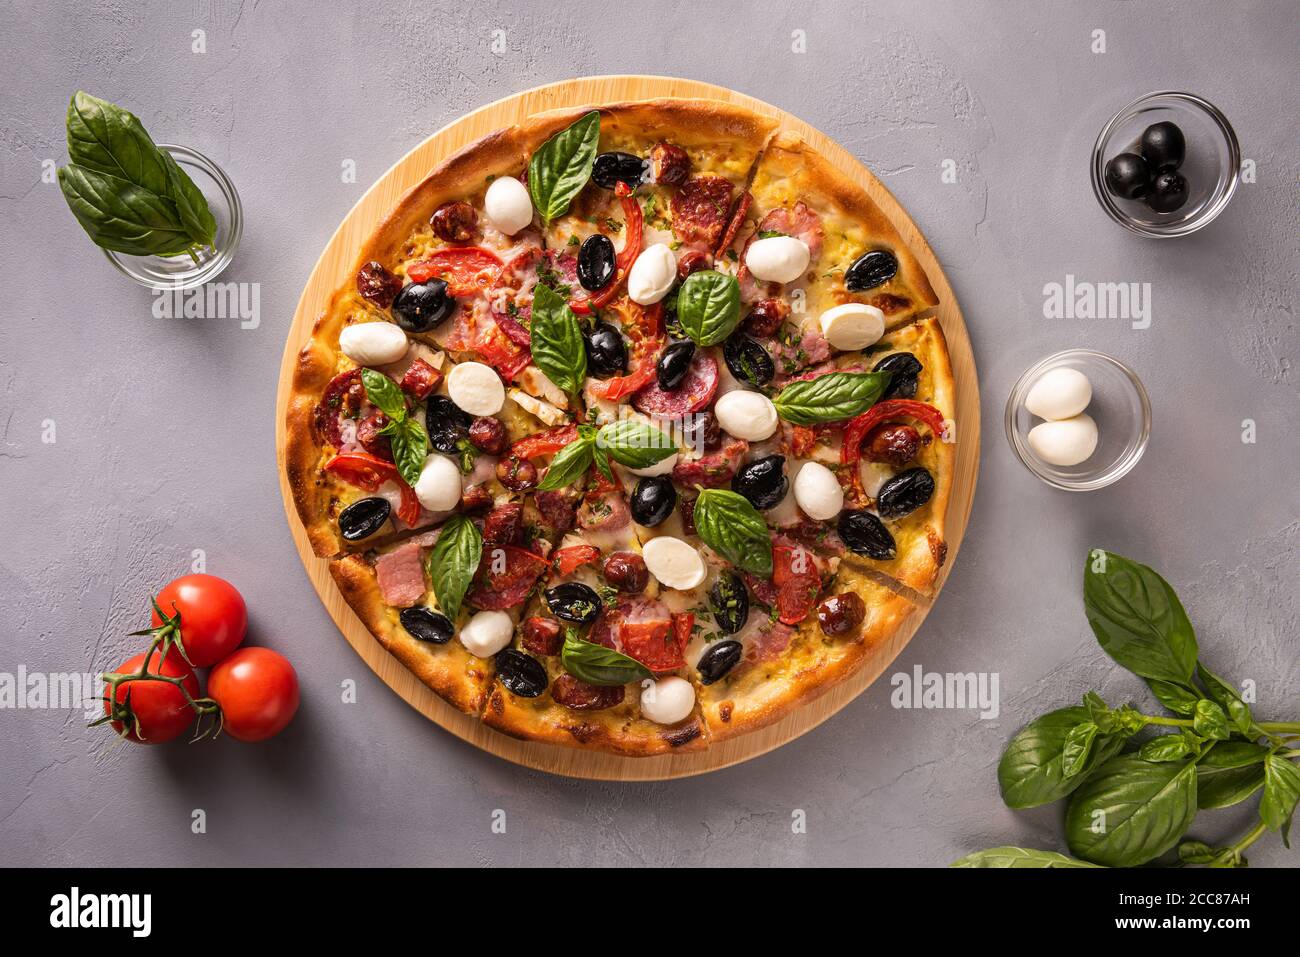 Italian pizza with ham, salami, black olives, mozzarella cheese, red tomatoes and basil leaves on gray textured stone background and few ingredients i Stock Photo